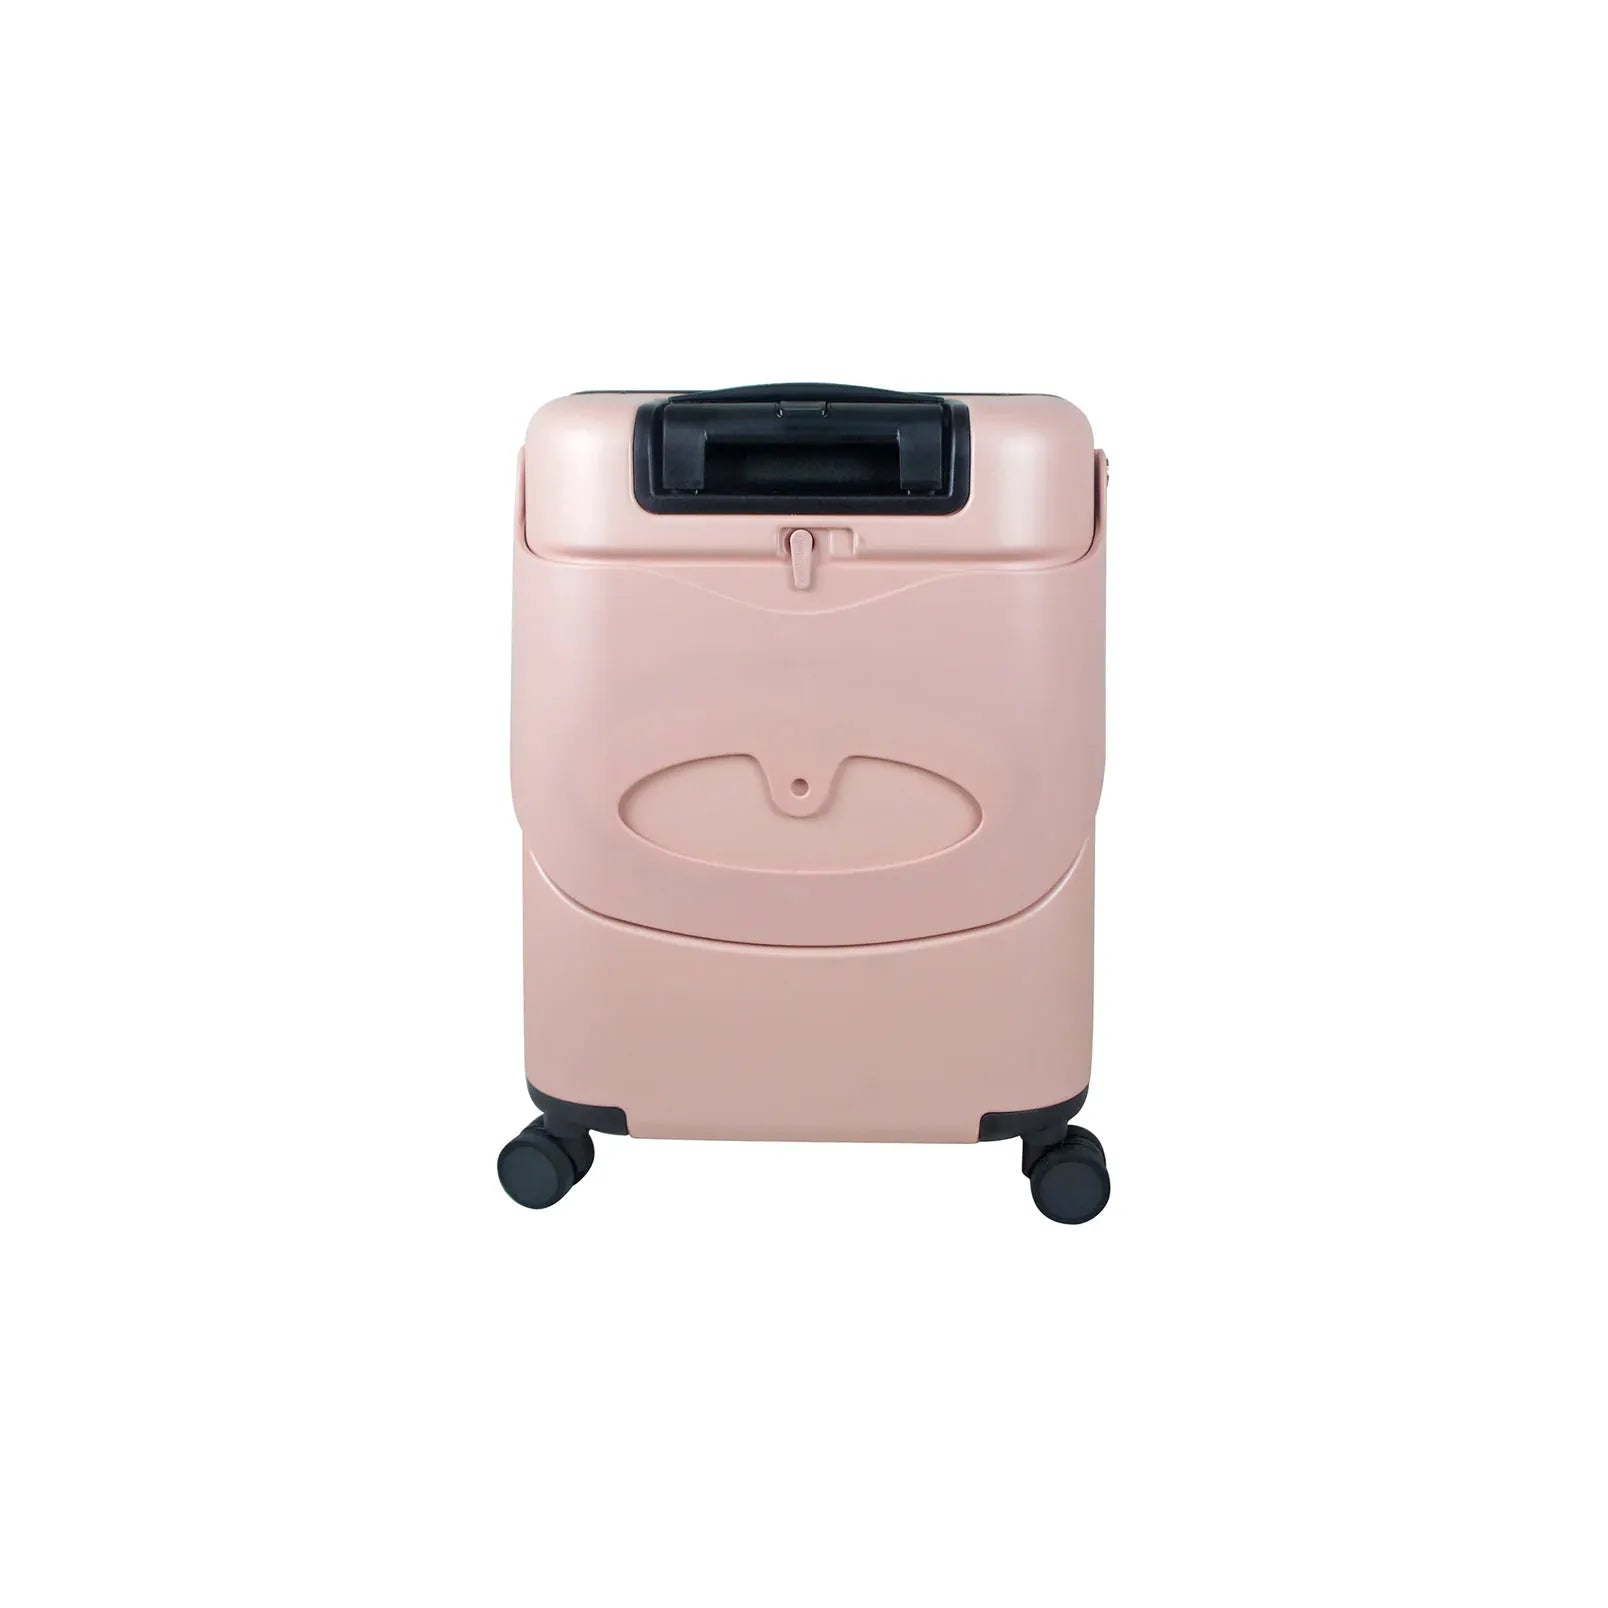 Miamily MultiCarry Ride-On Luggage (Dusty Pink) 18" (PRE-ORDER END JUNE ARRIVAL)